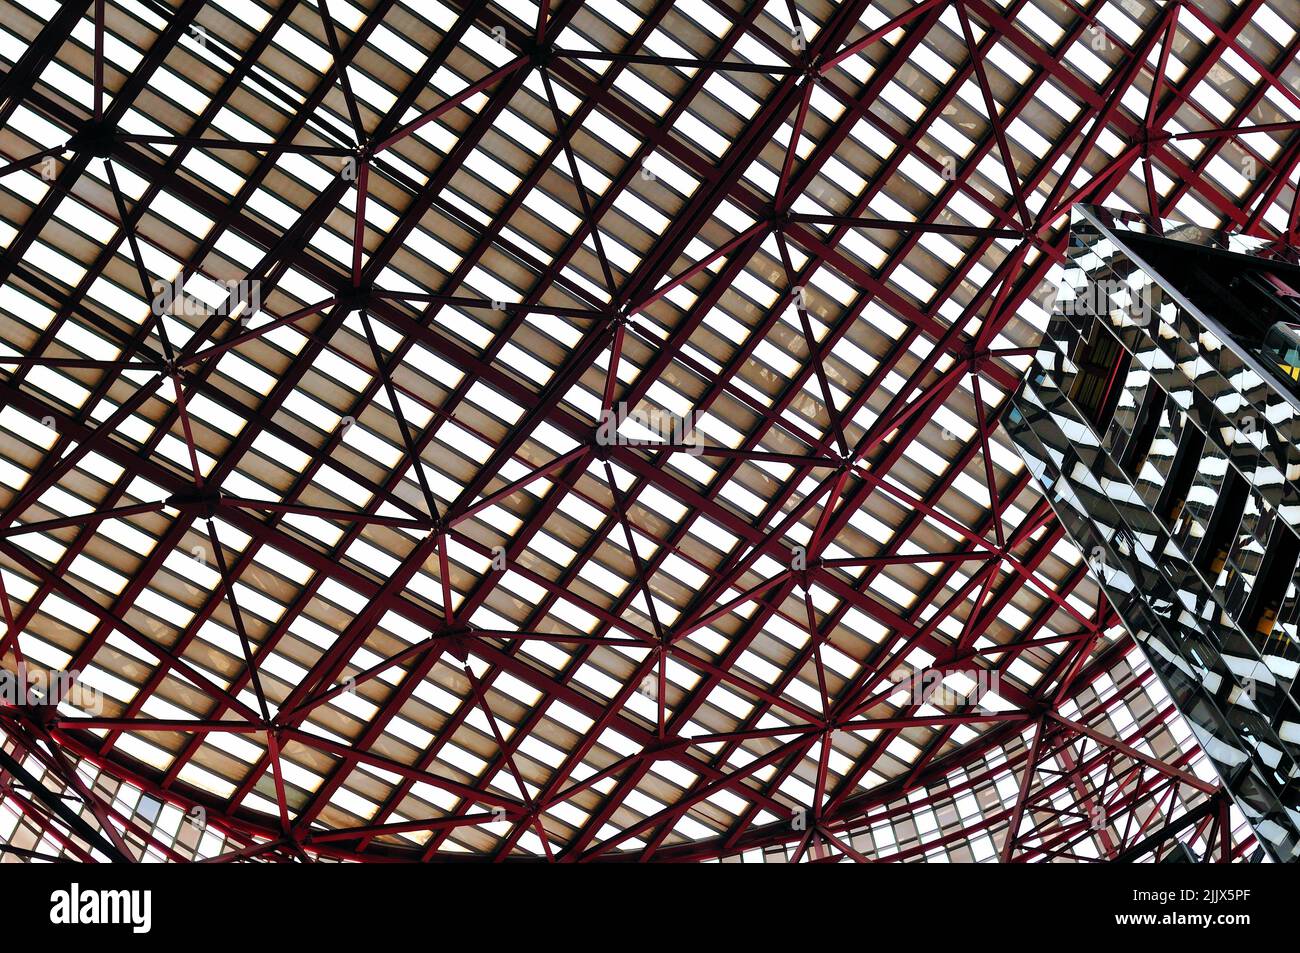 Chicago, Illinois, USA. The atrium roof at the State of Illinois Center also known as the Thompson Center. Stock Photo